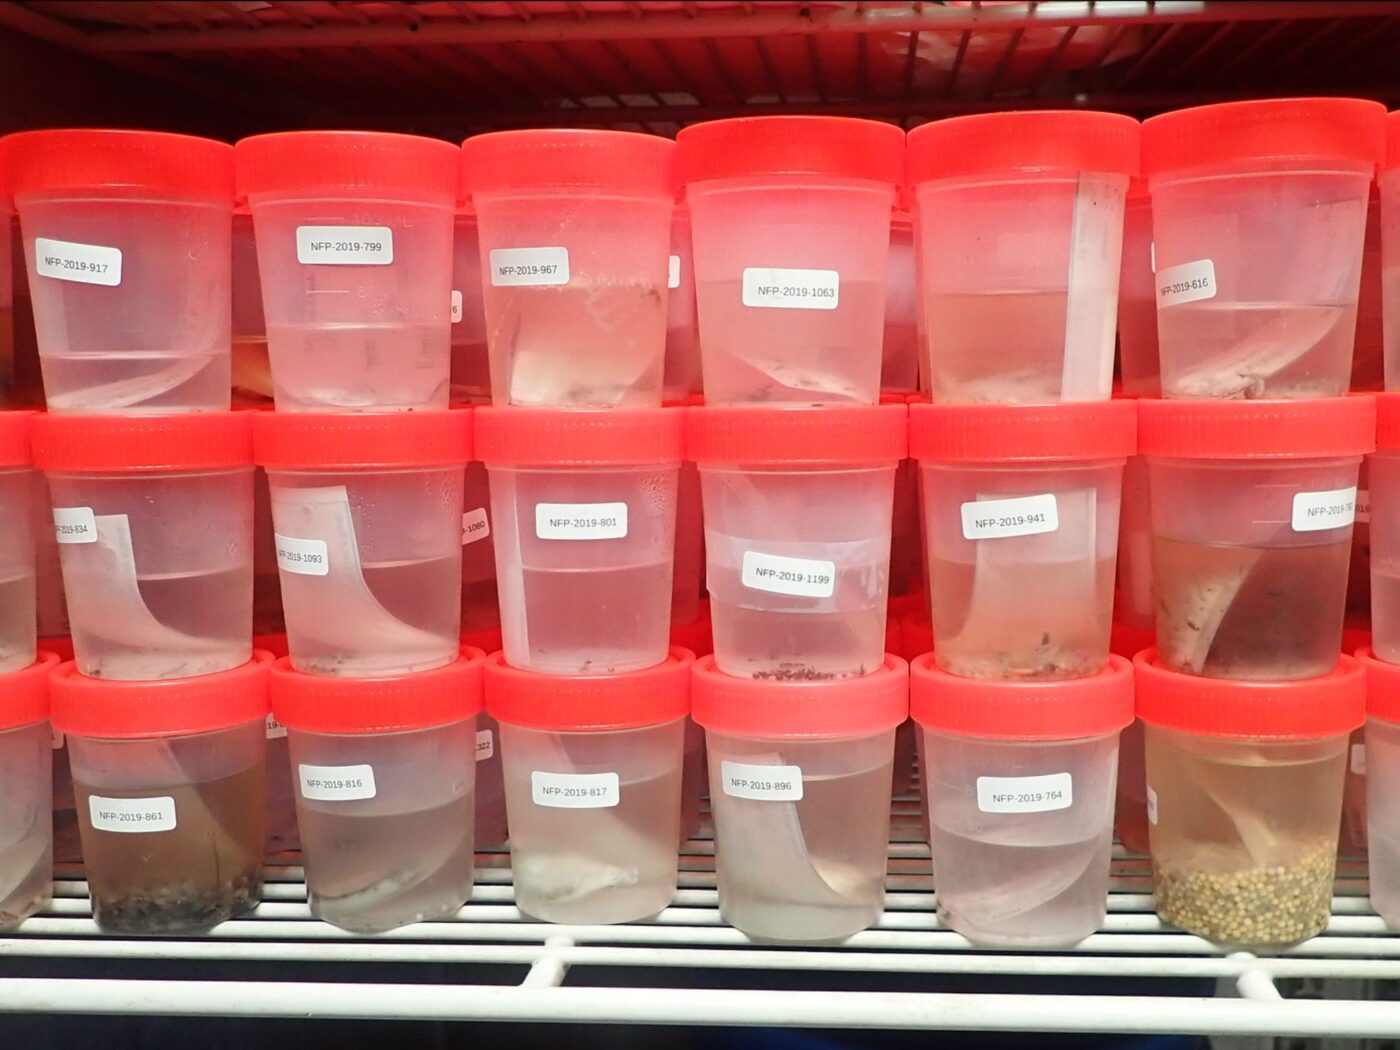 Stacks of plastic containers with red lids that are labeled and filled with liquid and diet samples